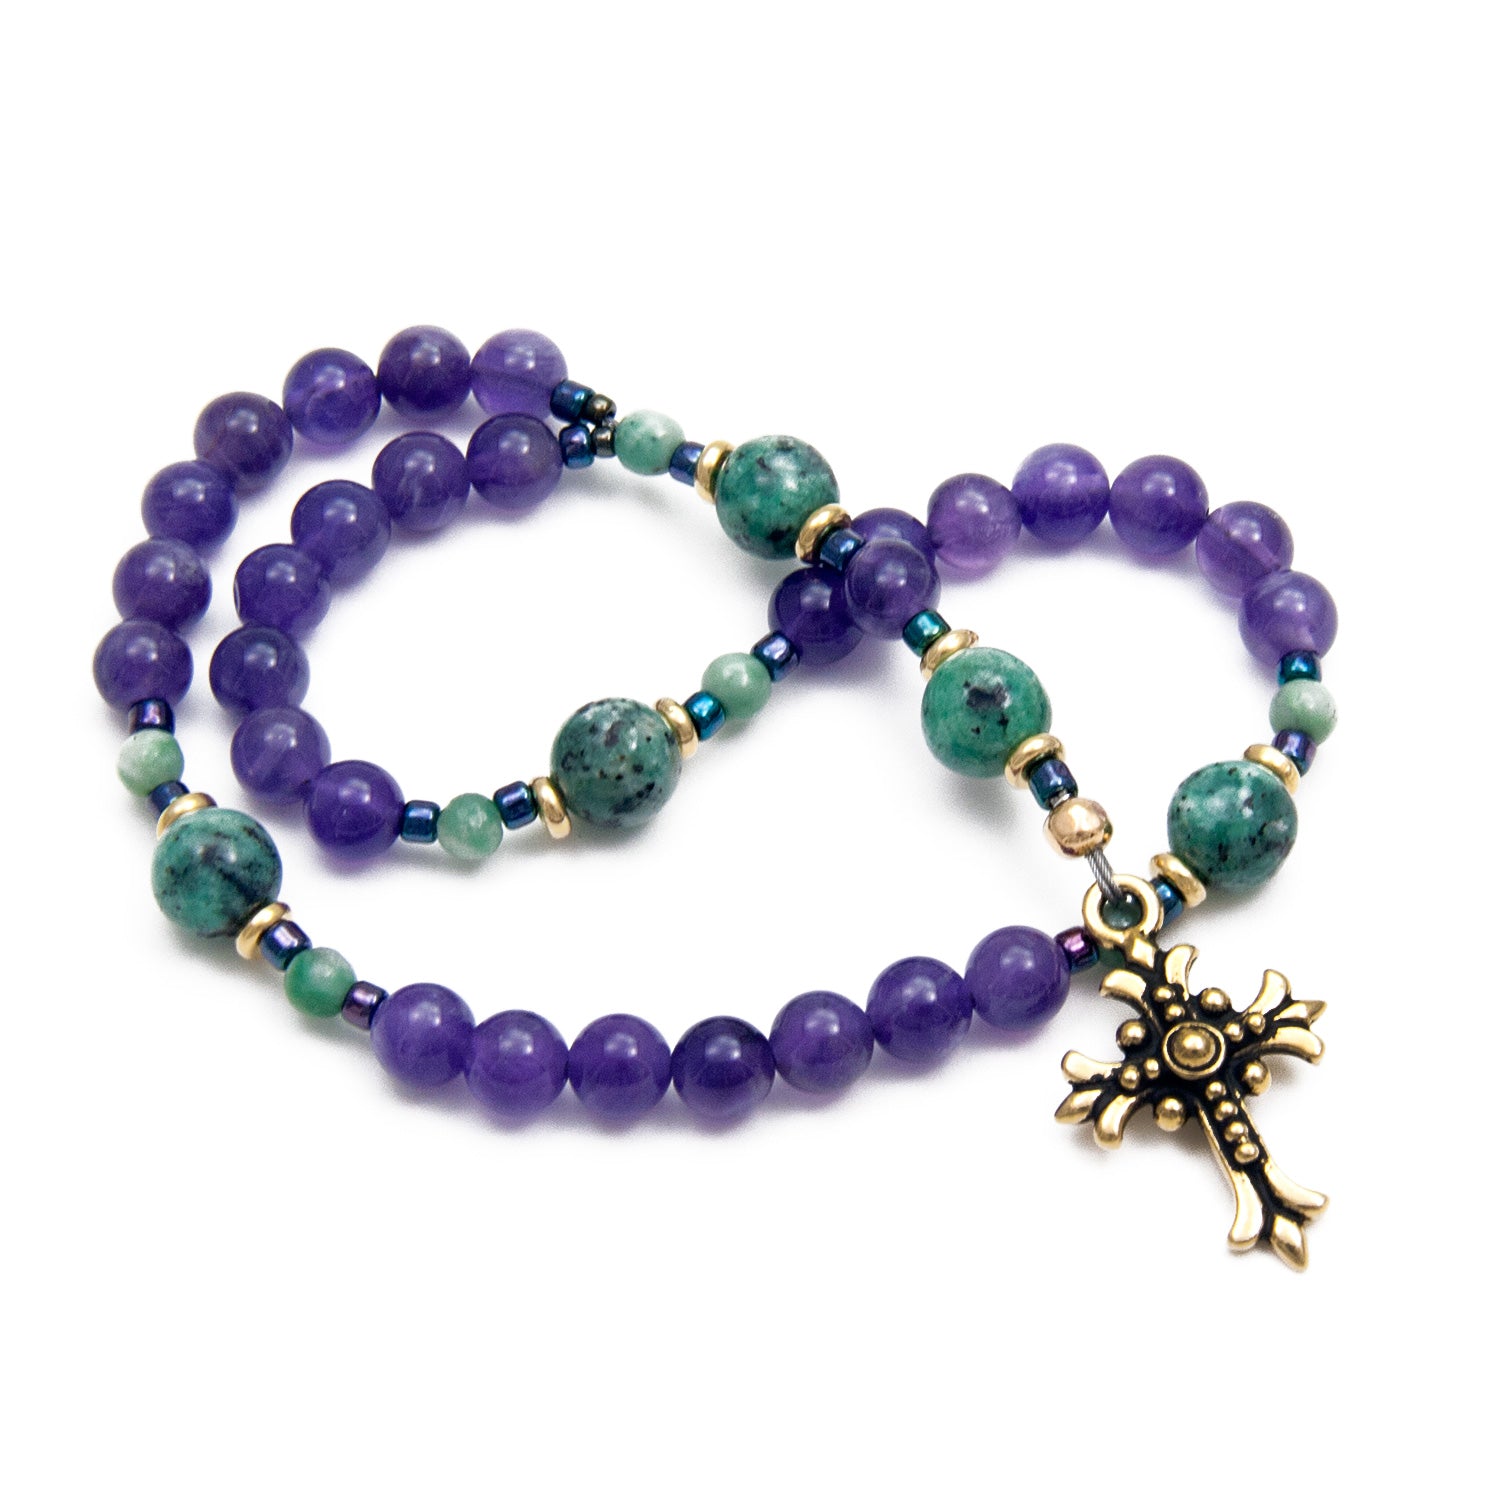 Amethyst Angican Rosary - Unspoken Elements